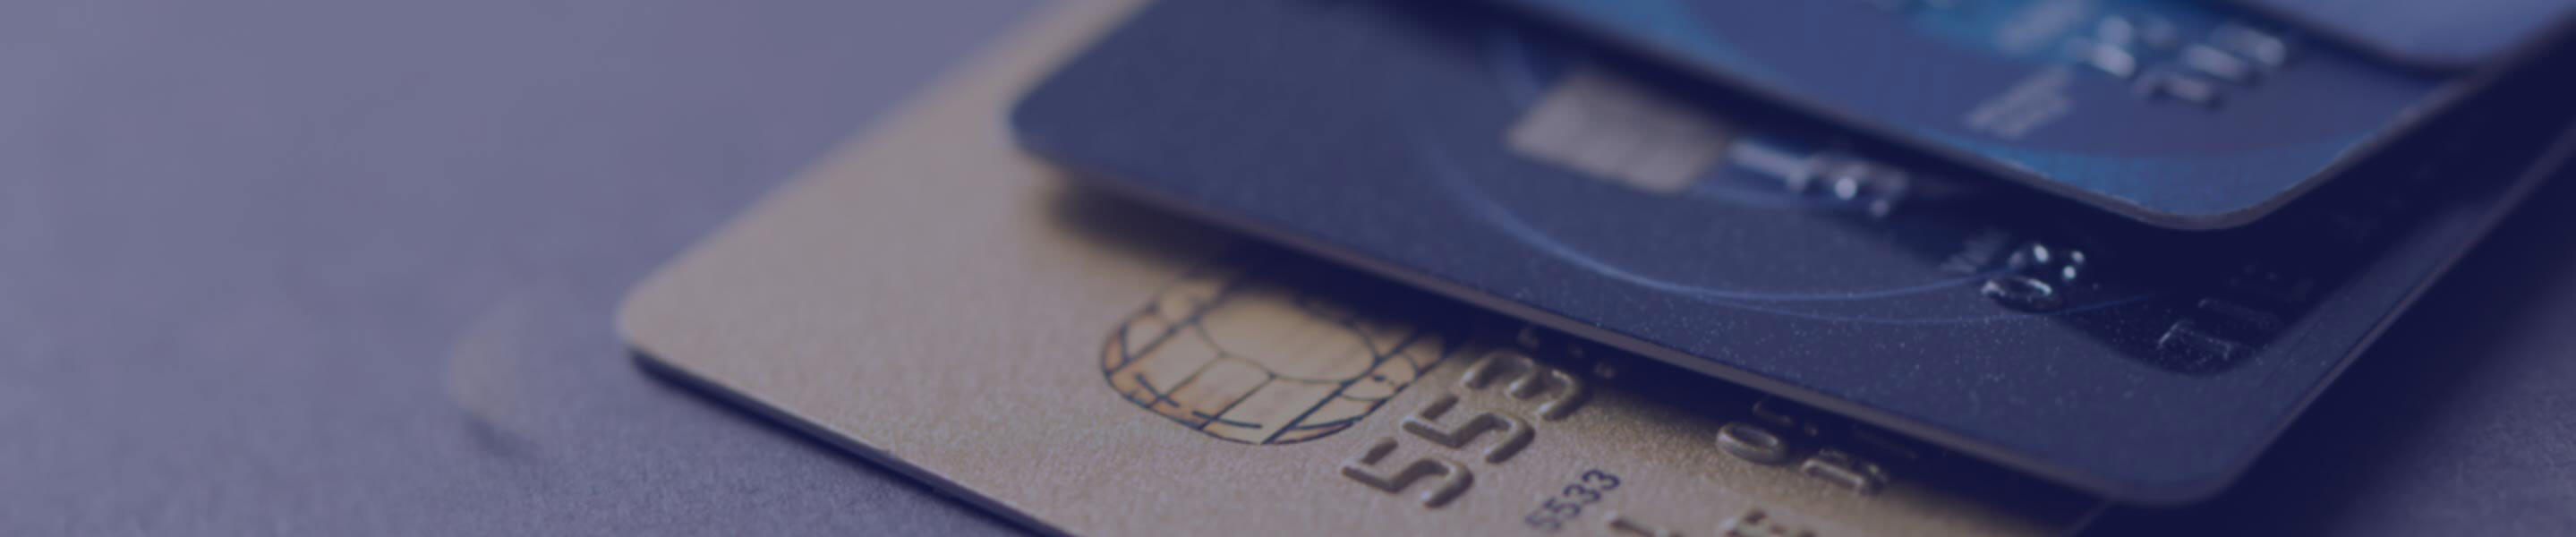 emv and payment card issuance banner